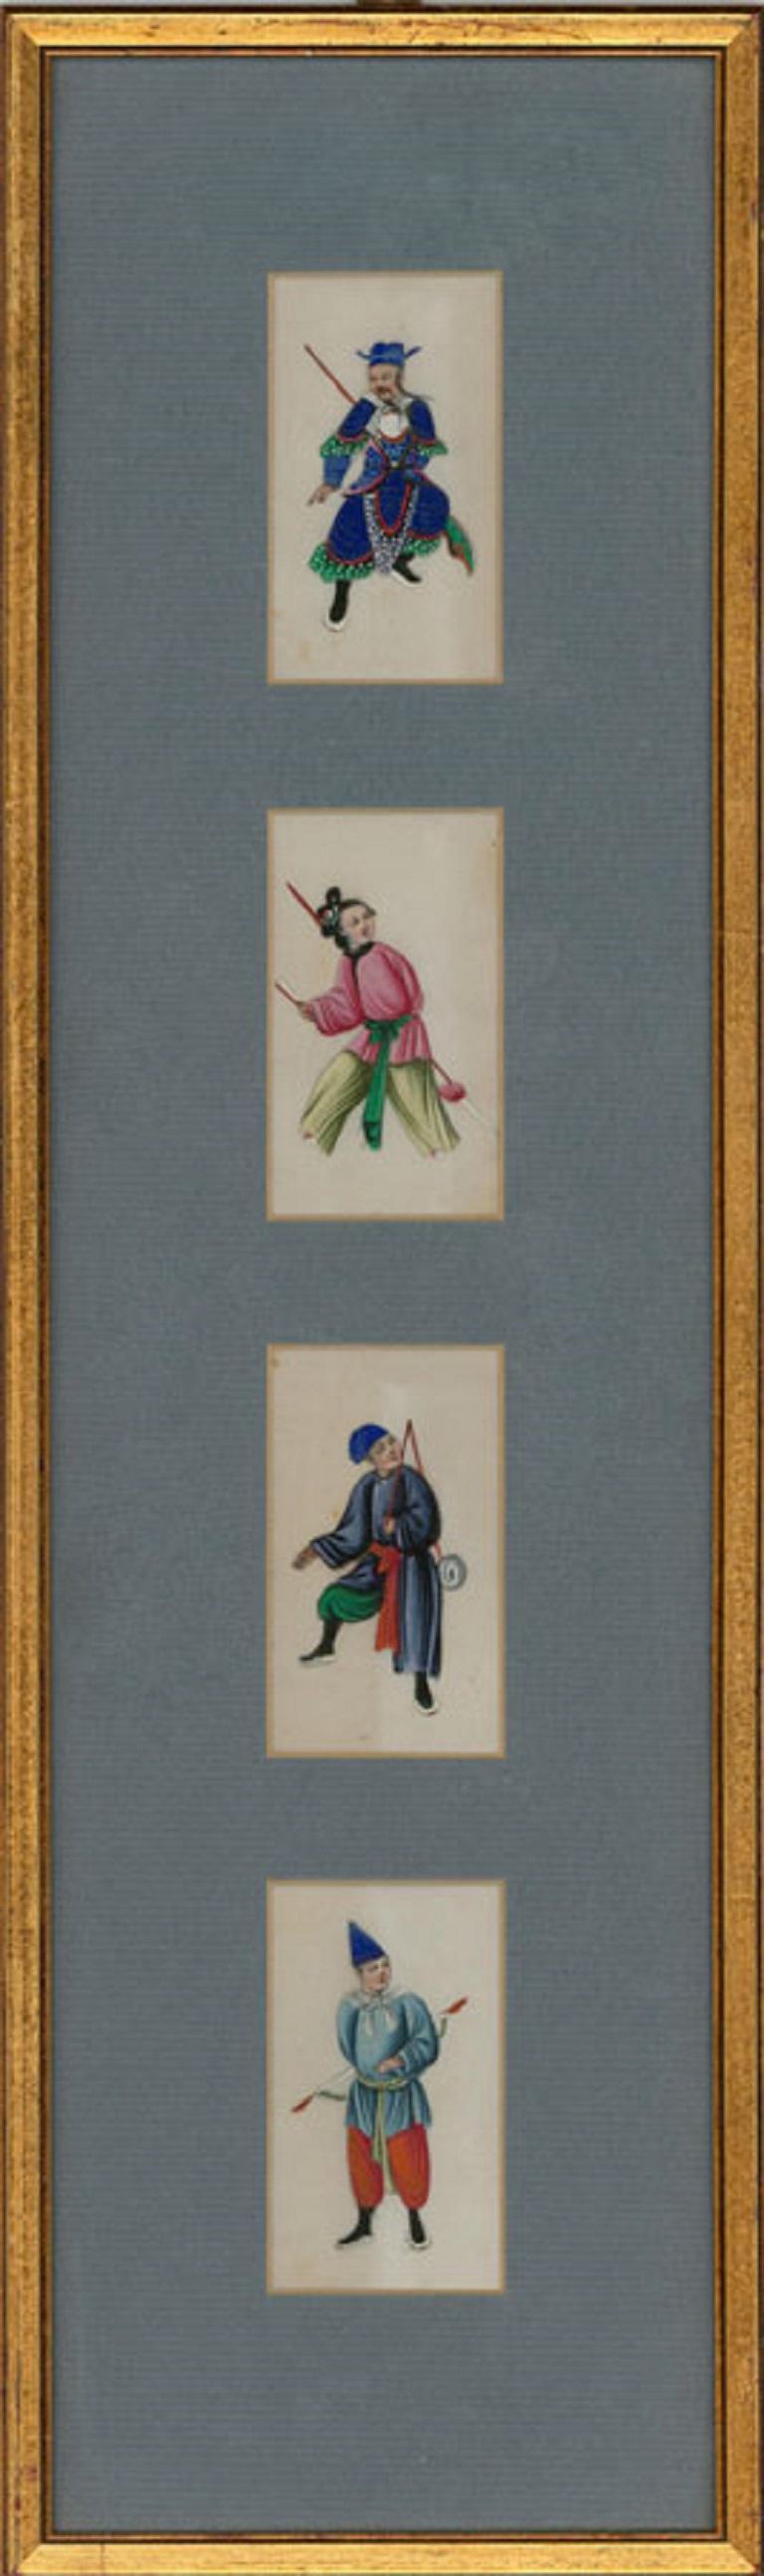 Unknown Figurative Art - Framed 19th Century Gouache - Four Chinese Figure Studies on Pith Paper